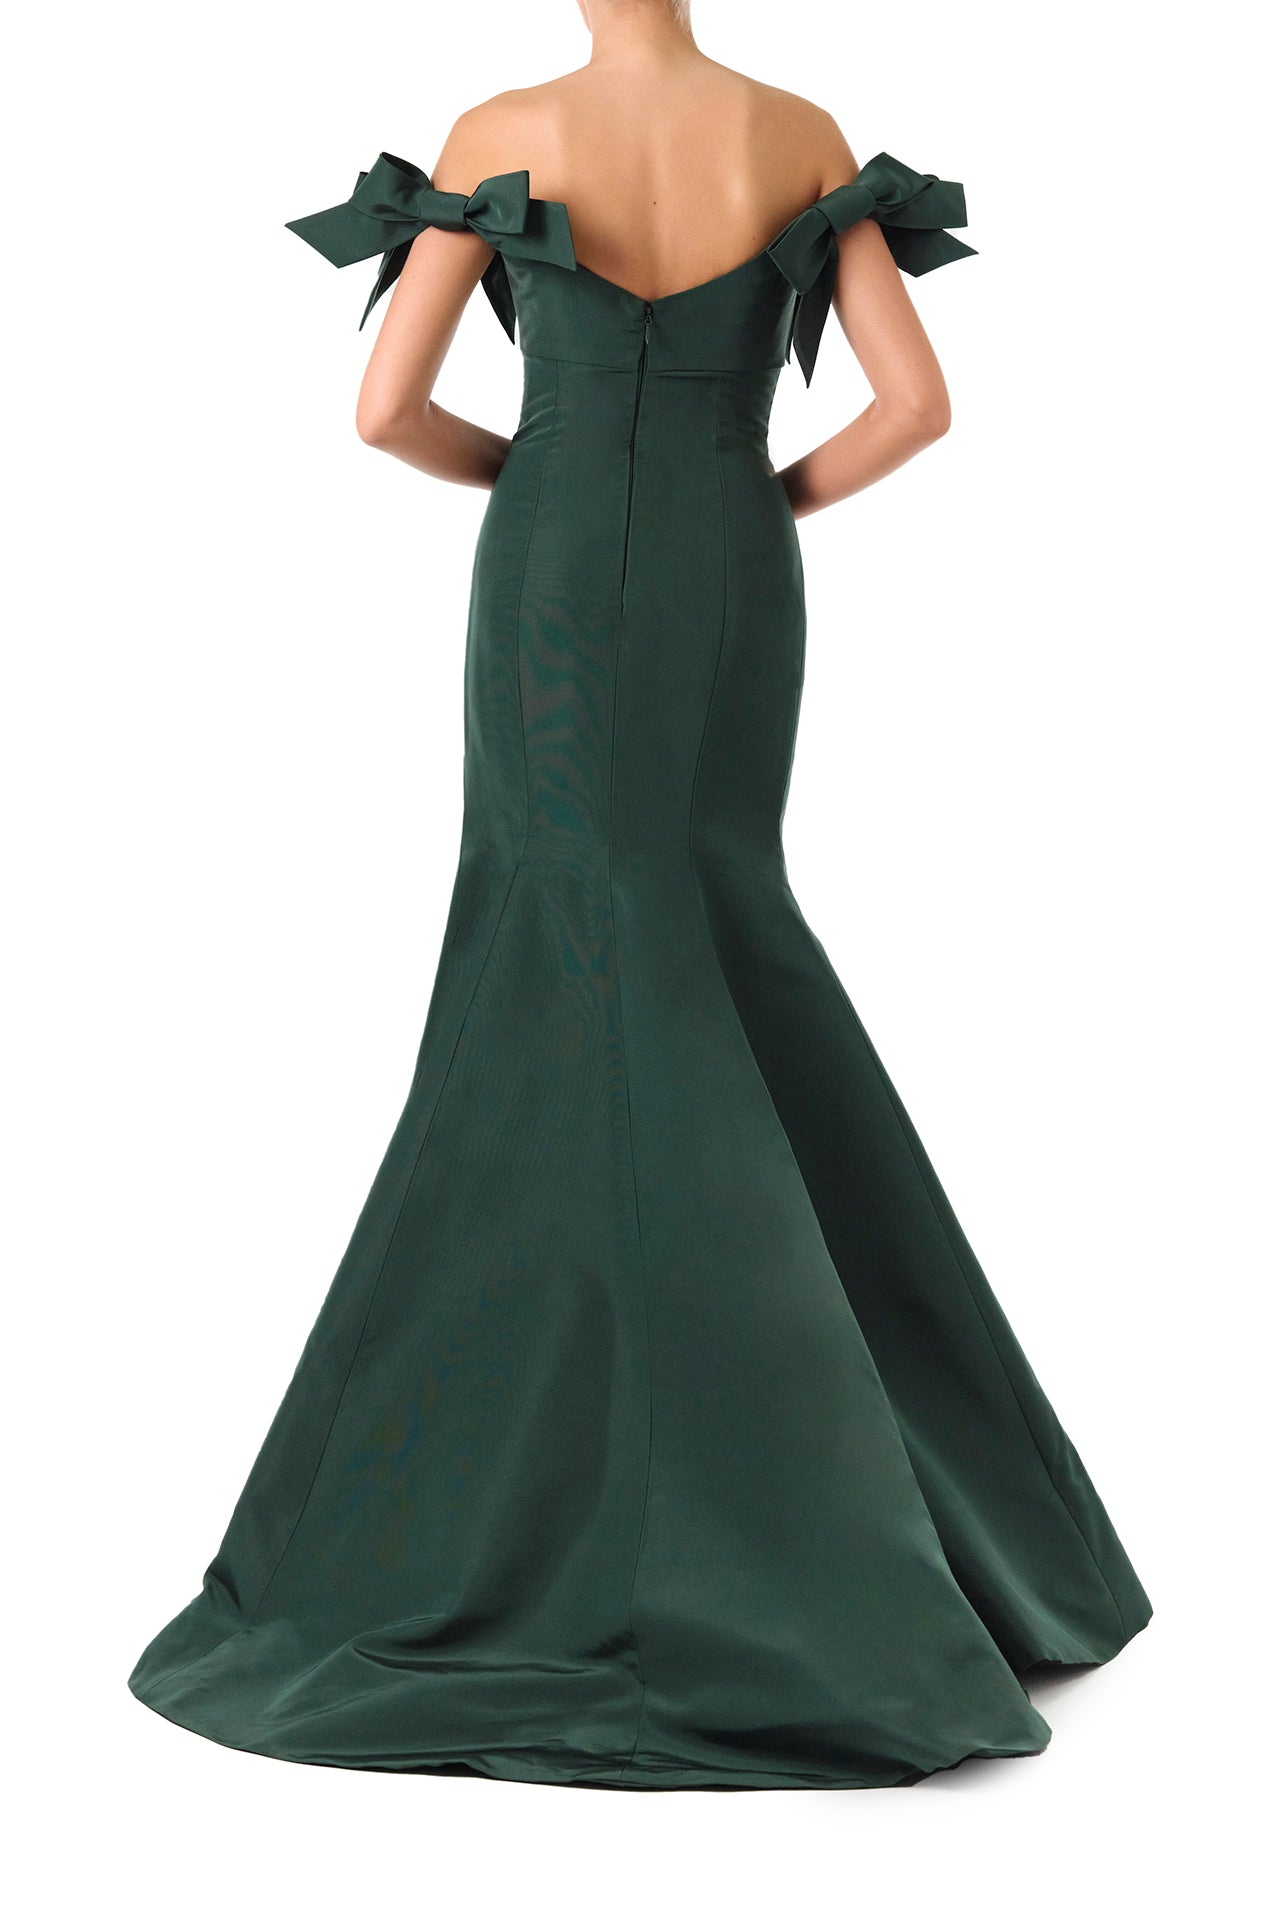 Monique Lhuillier Fall 2024 off the shoulder gown with trumpet skirt and bow sleeves in Juniper green faille fabric - back.